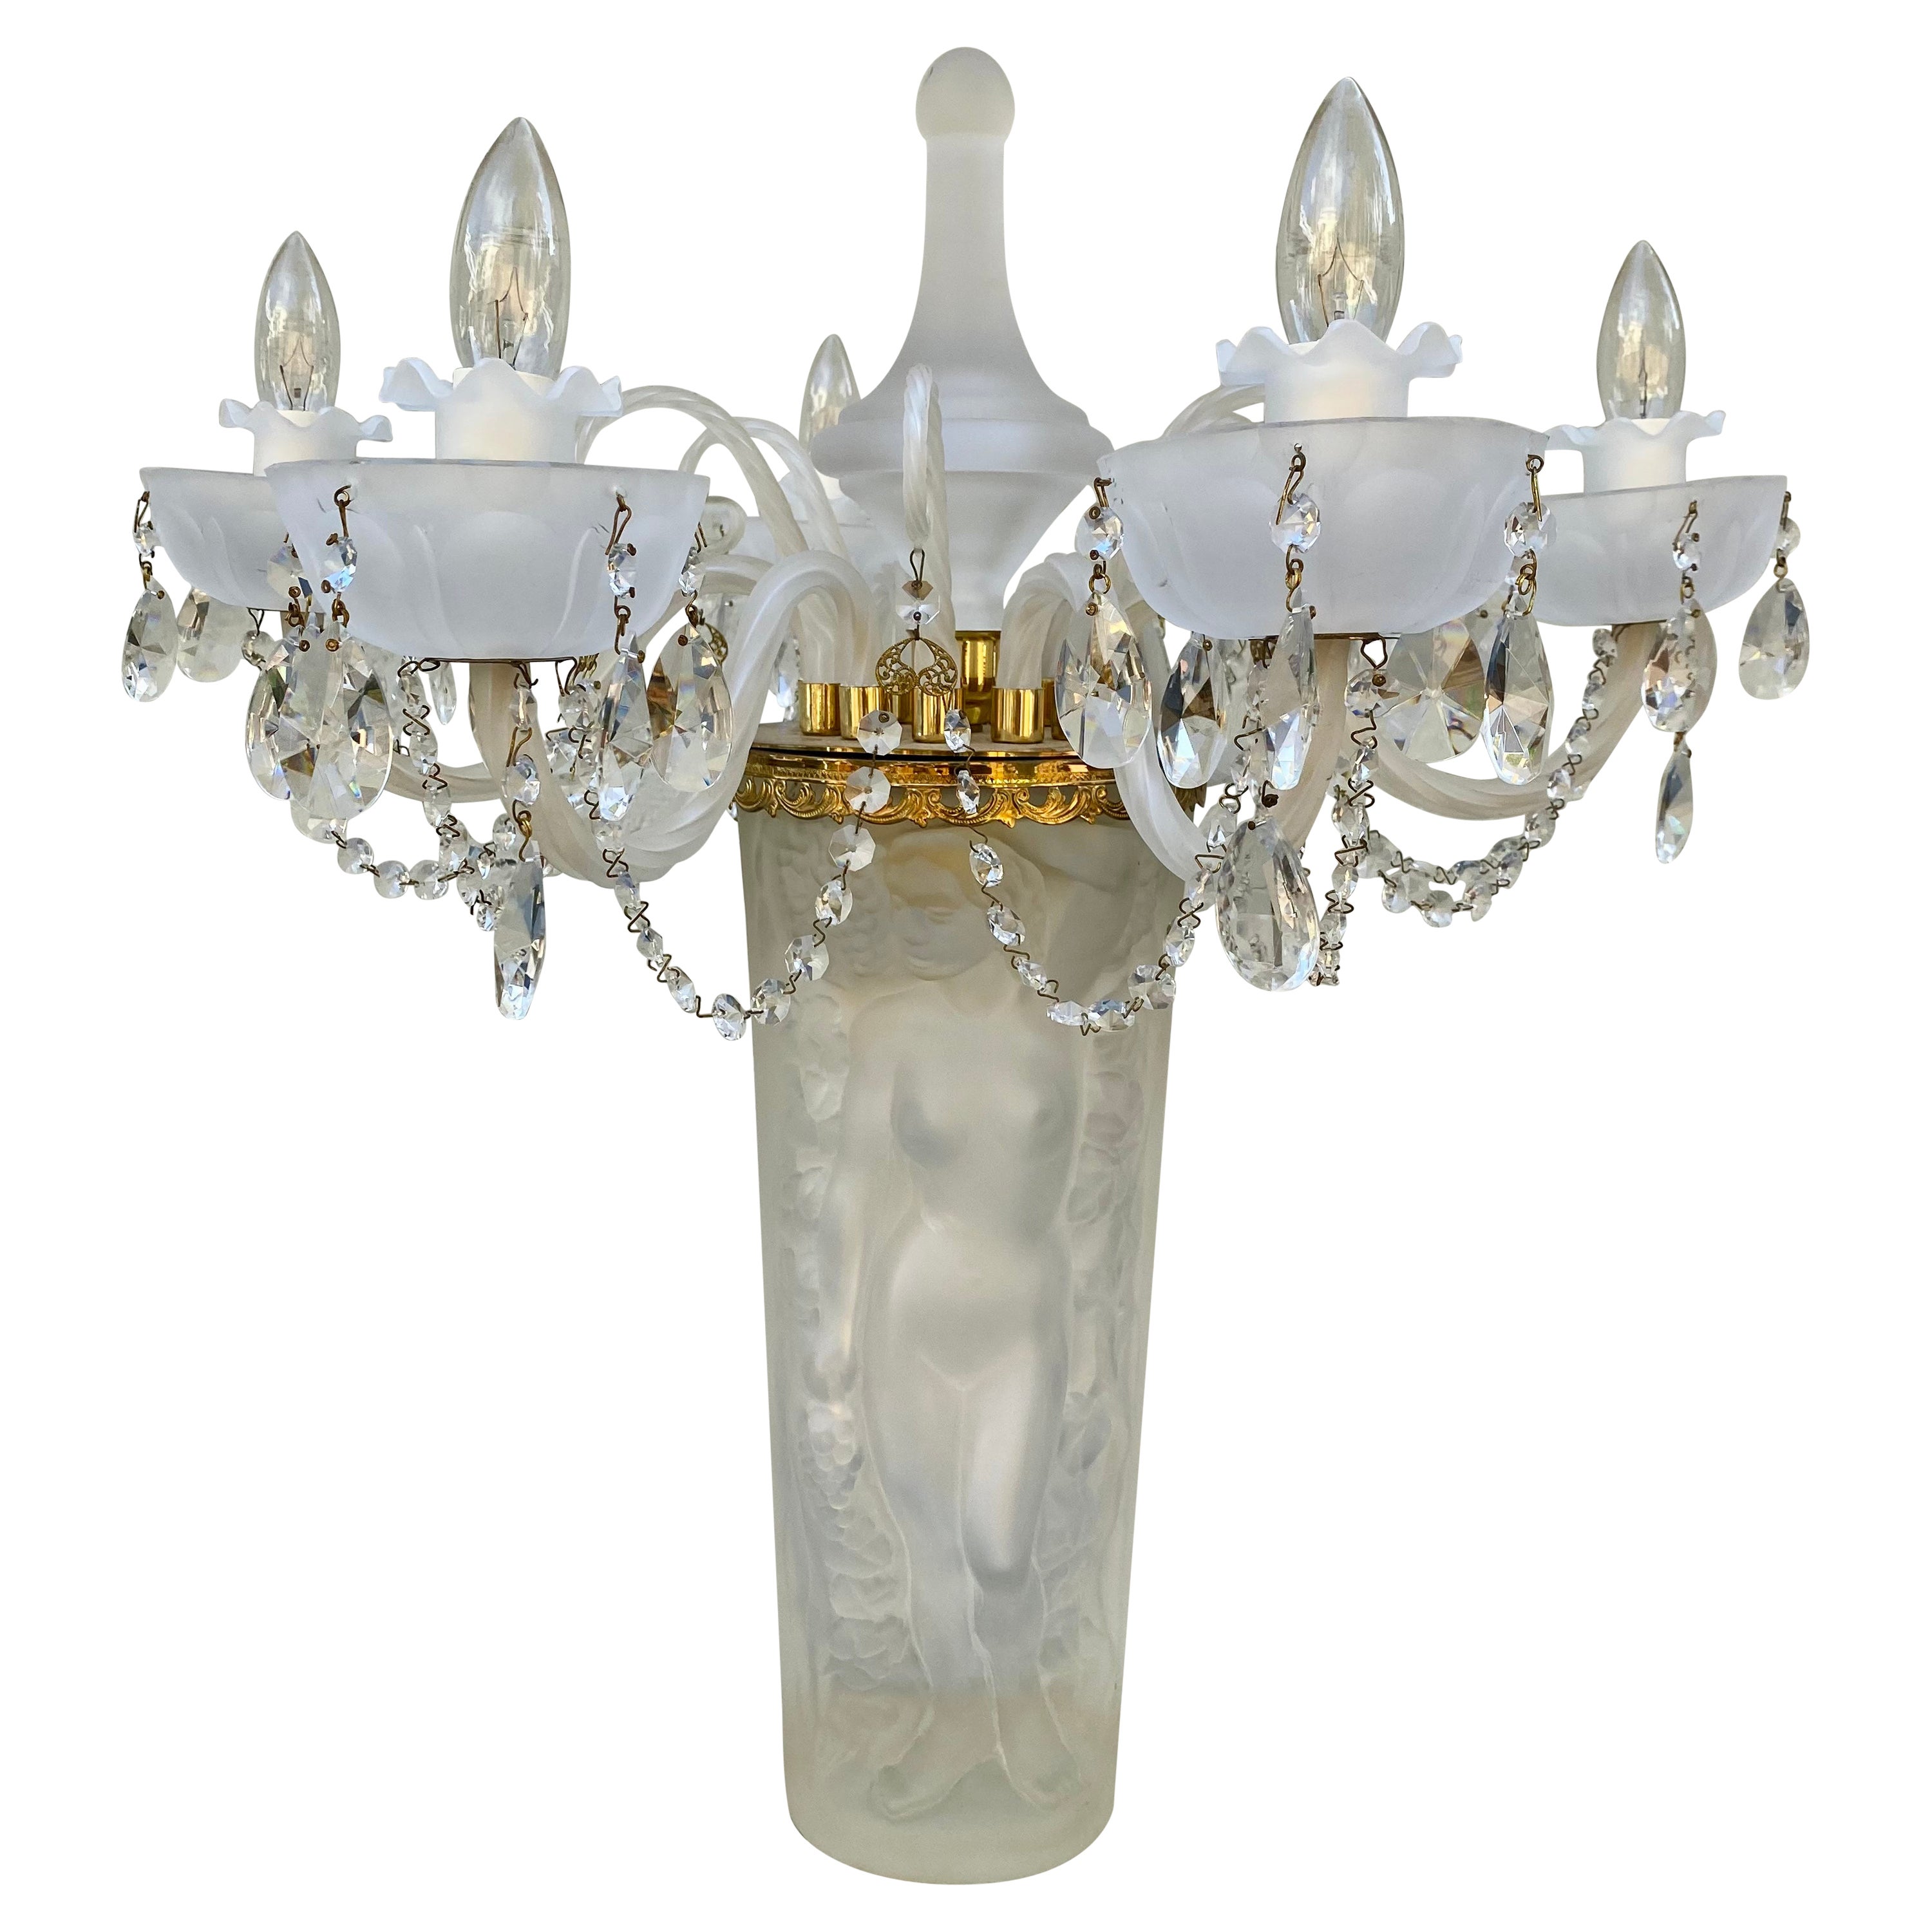 1970s Lalique Style Crystal and Brass Bacchante Figurative Chandelier Table Lamp For Sale